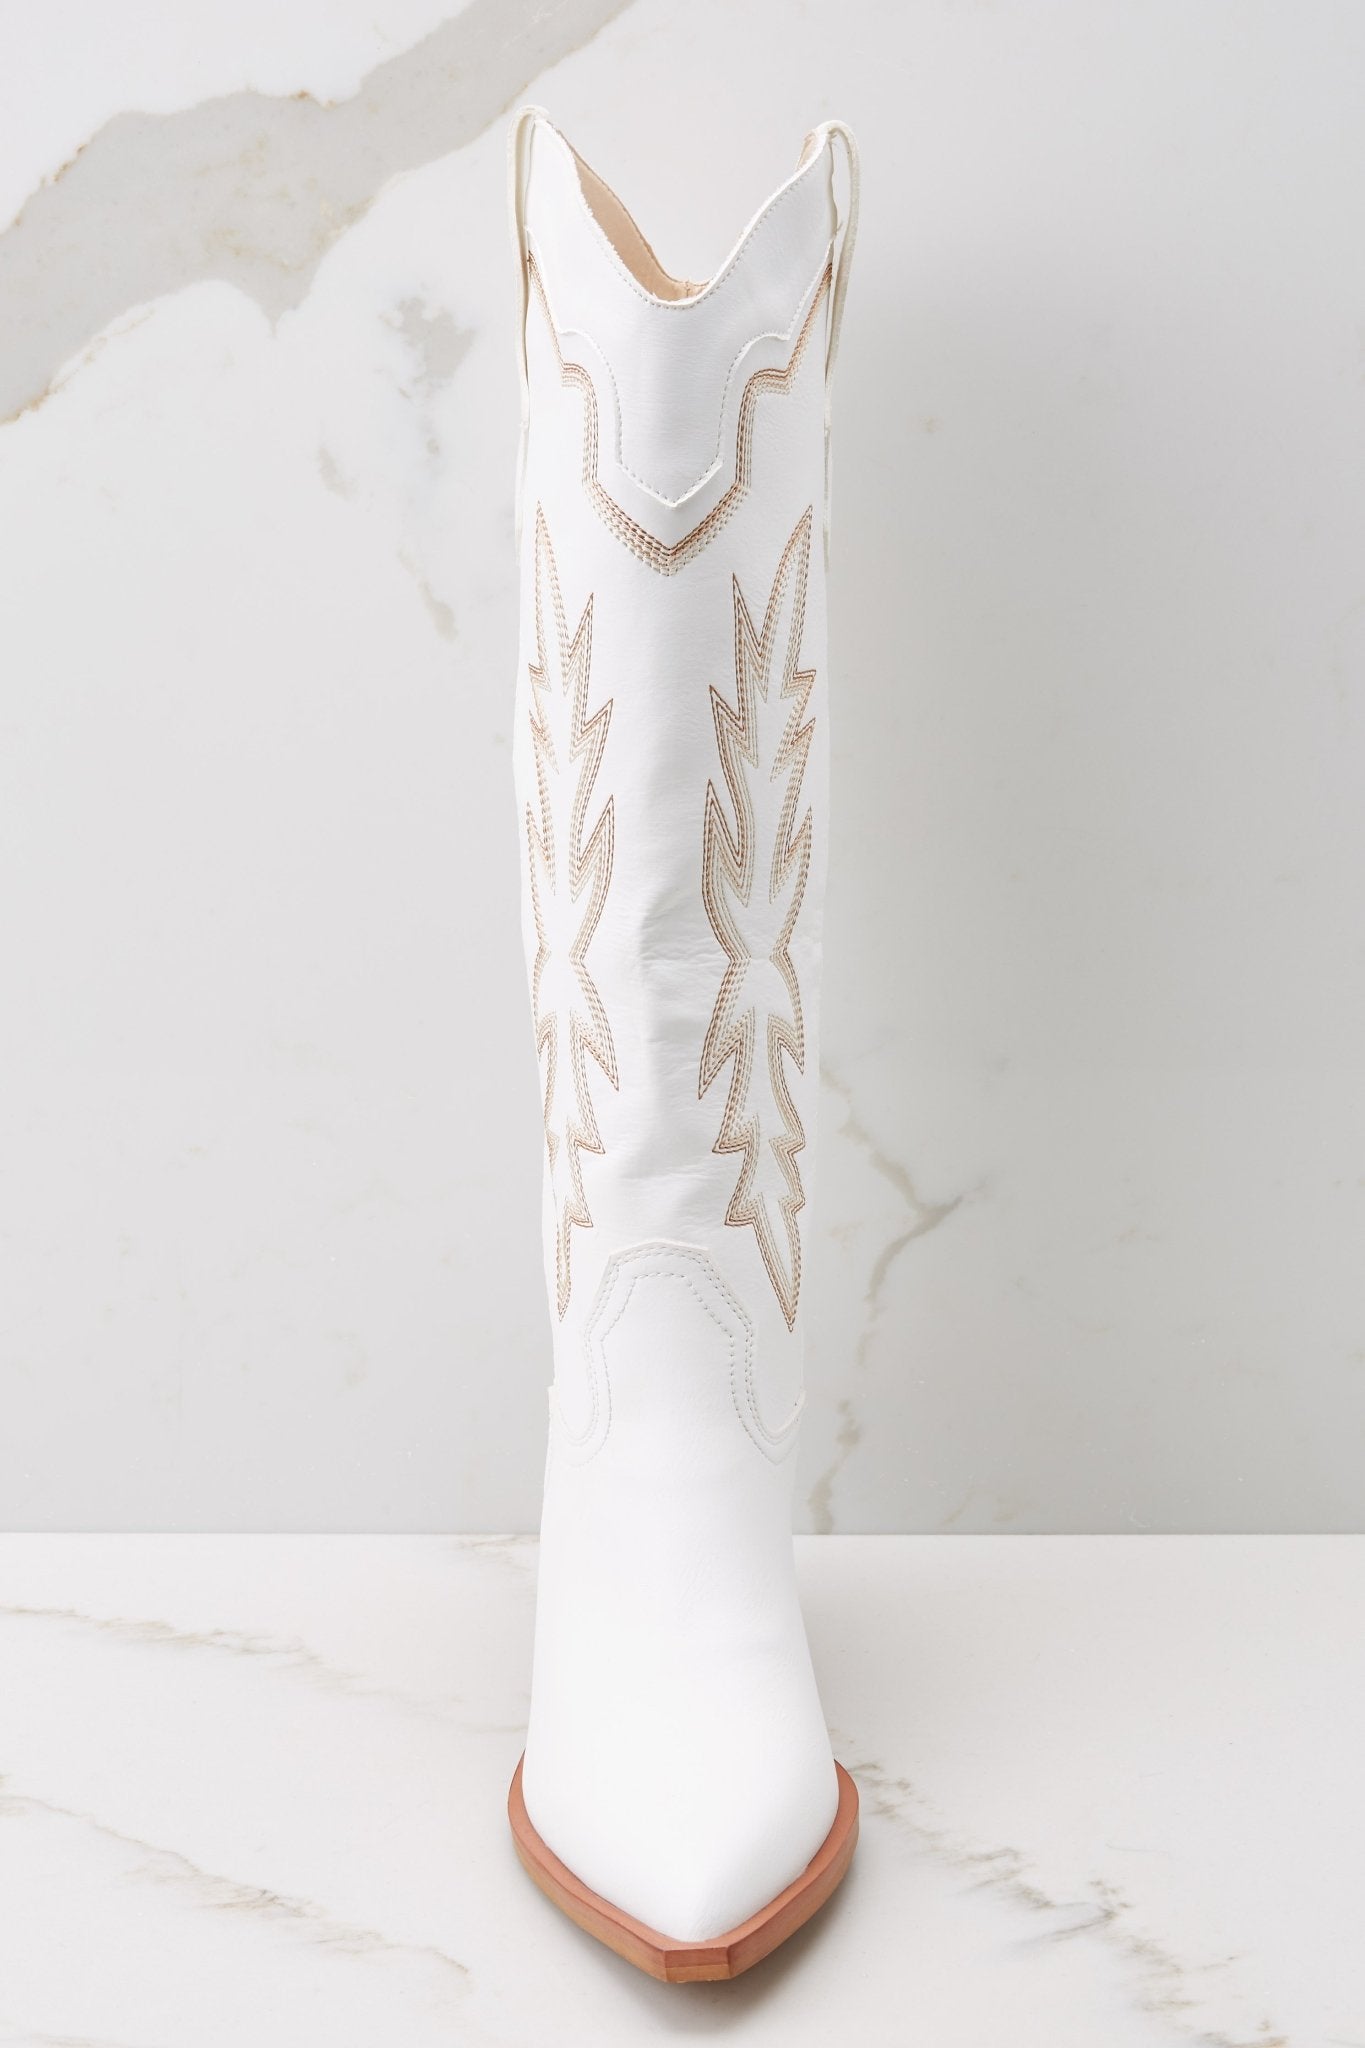 Front view of these boots that feature a pointed toe and tan stitched design up the leg.